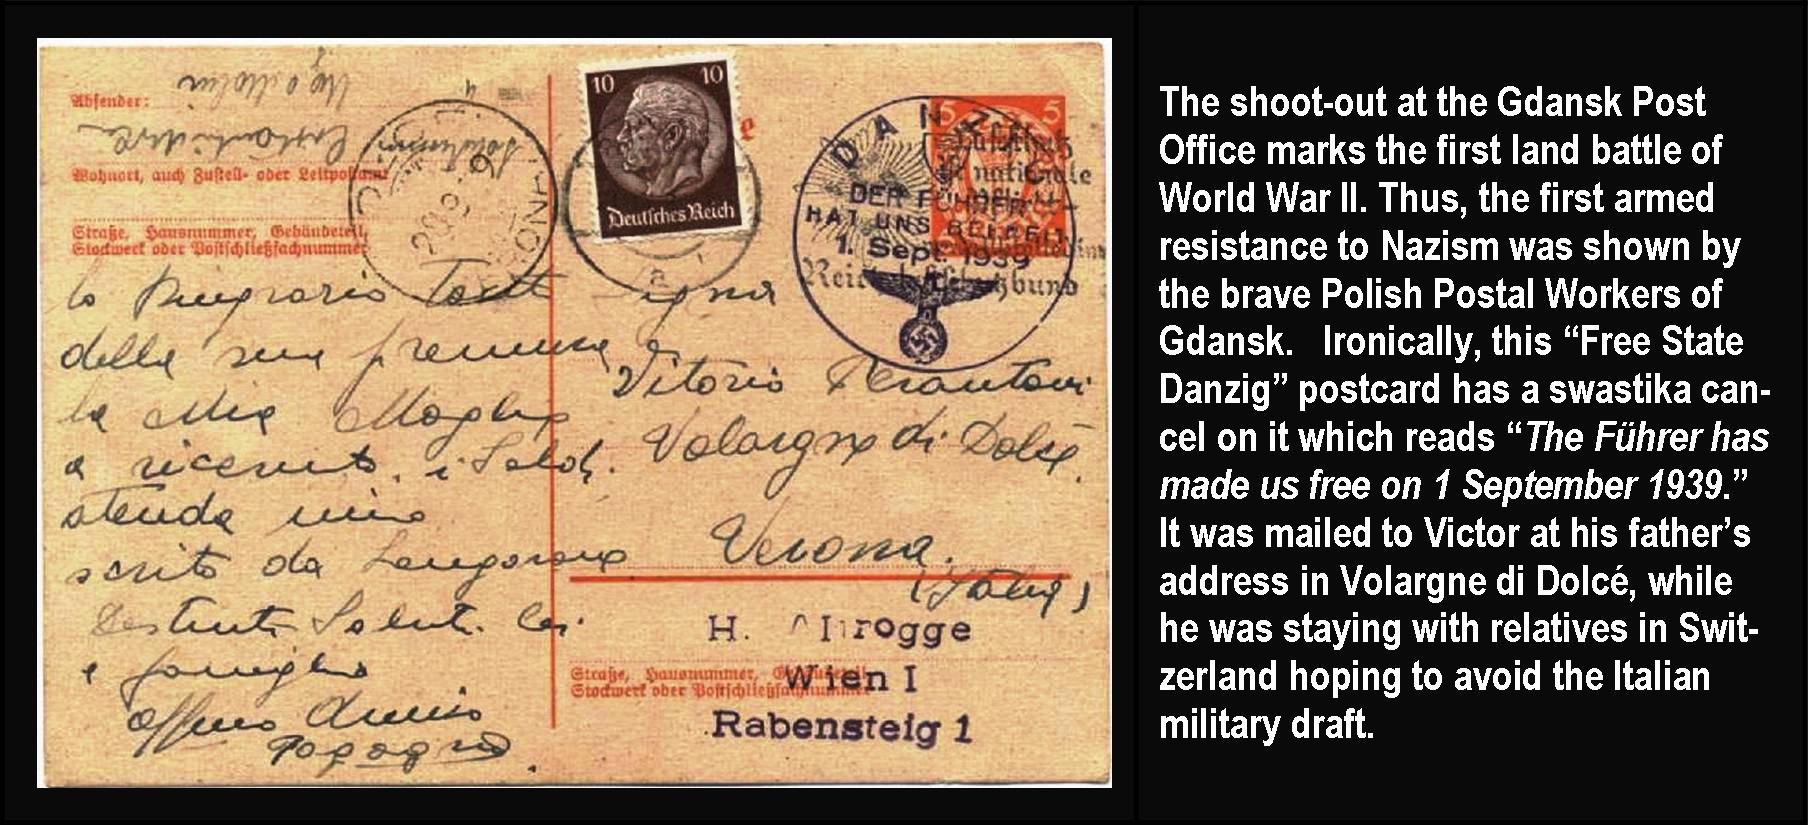 The shoot-out at the Gdansk Post Office marks the first real land battle of World War 2, thus the first armed resistance to Nazism was shown by the brave Polish Postal Workers of Gdansk.